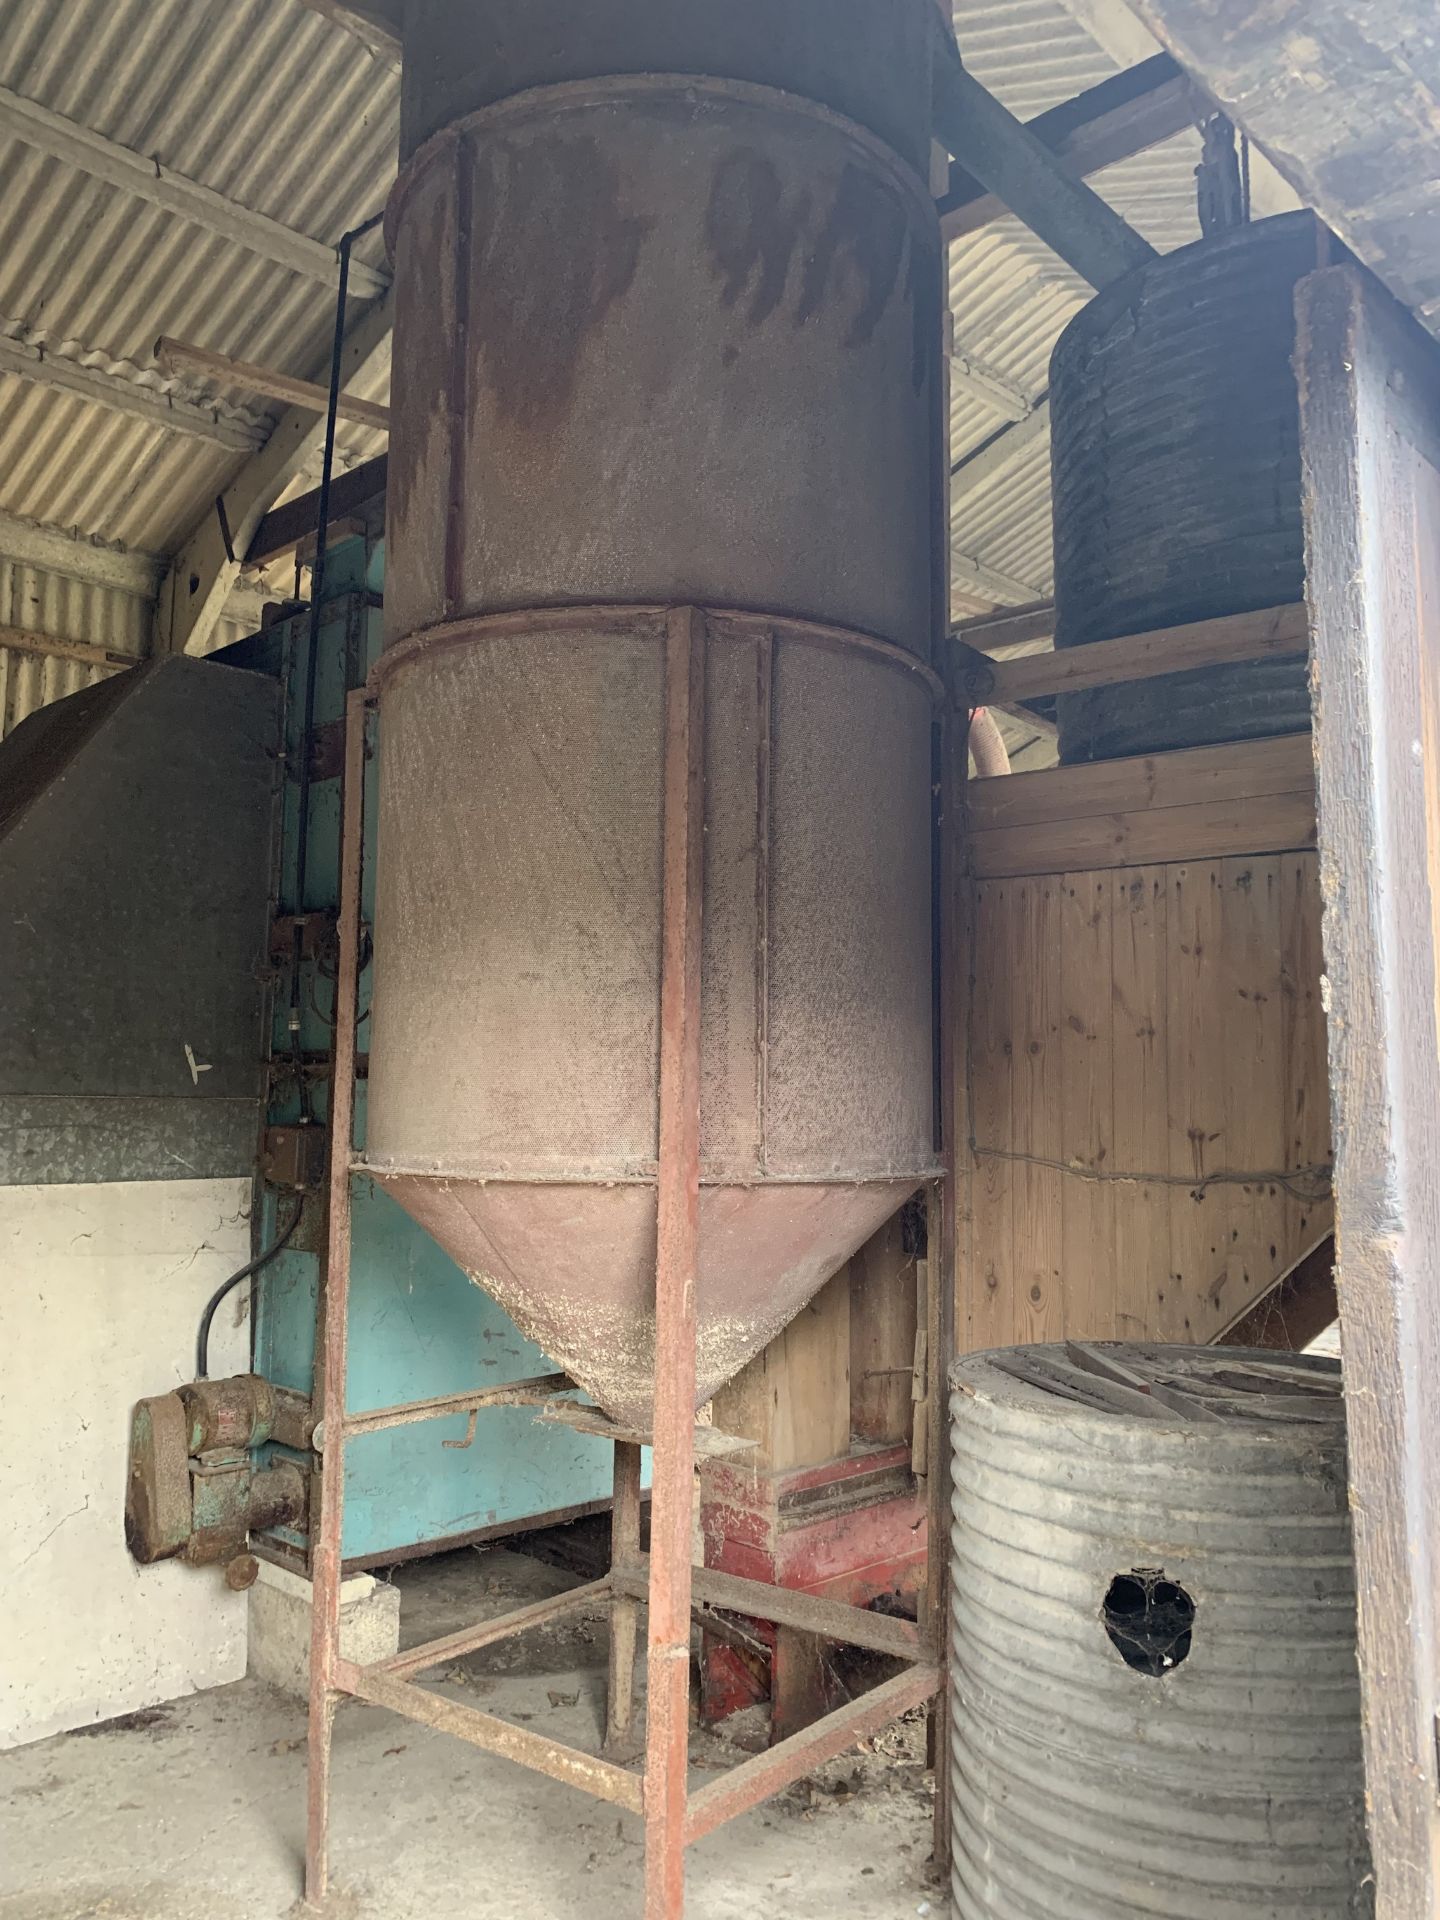 Corn dryer system, purchaser to remove - Image 4 of 4